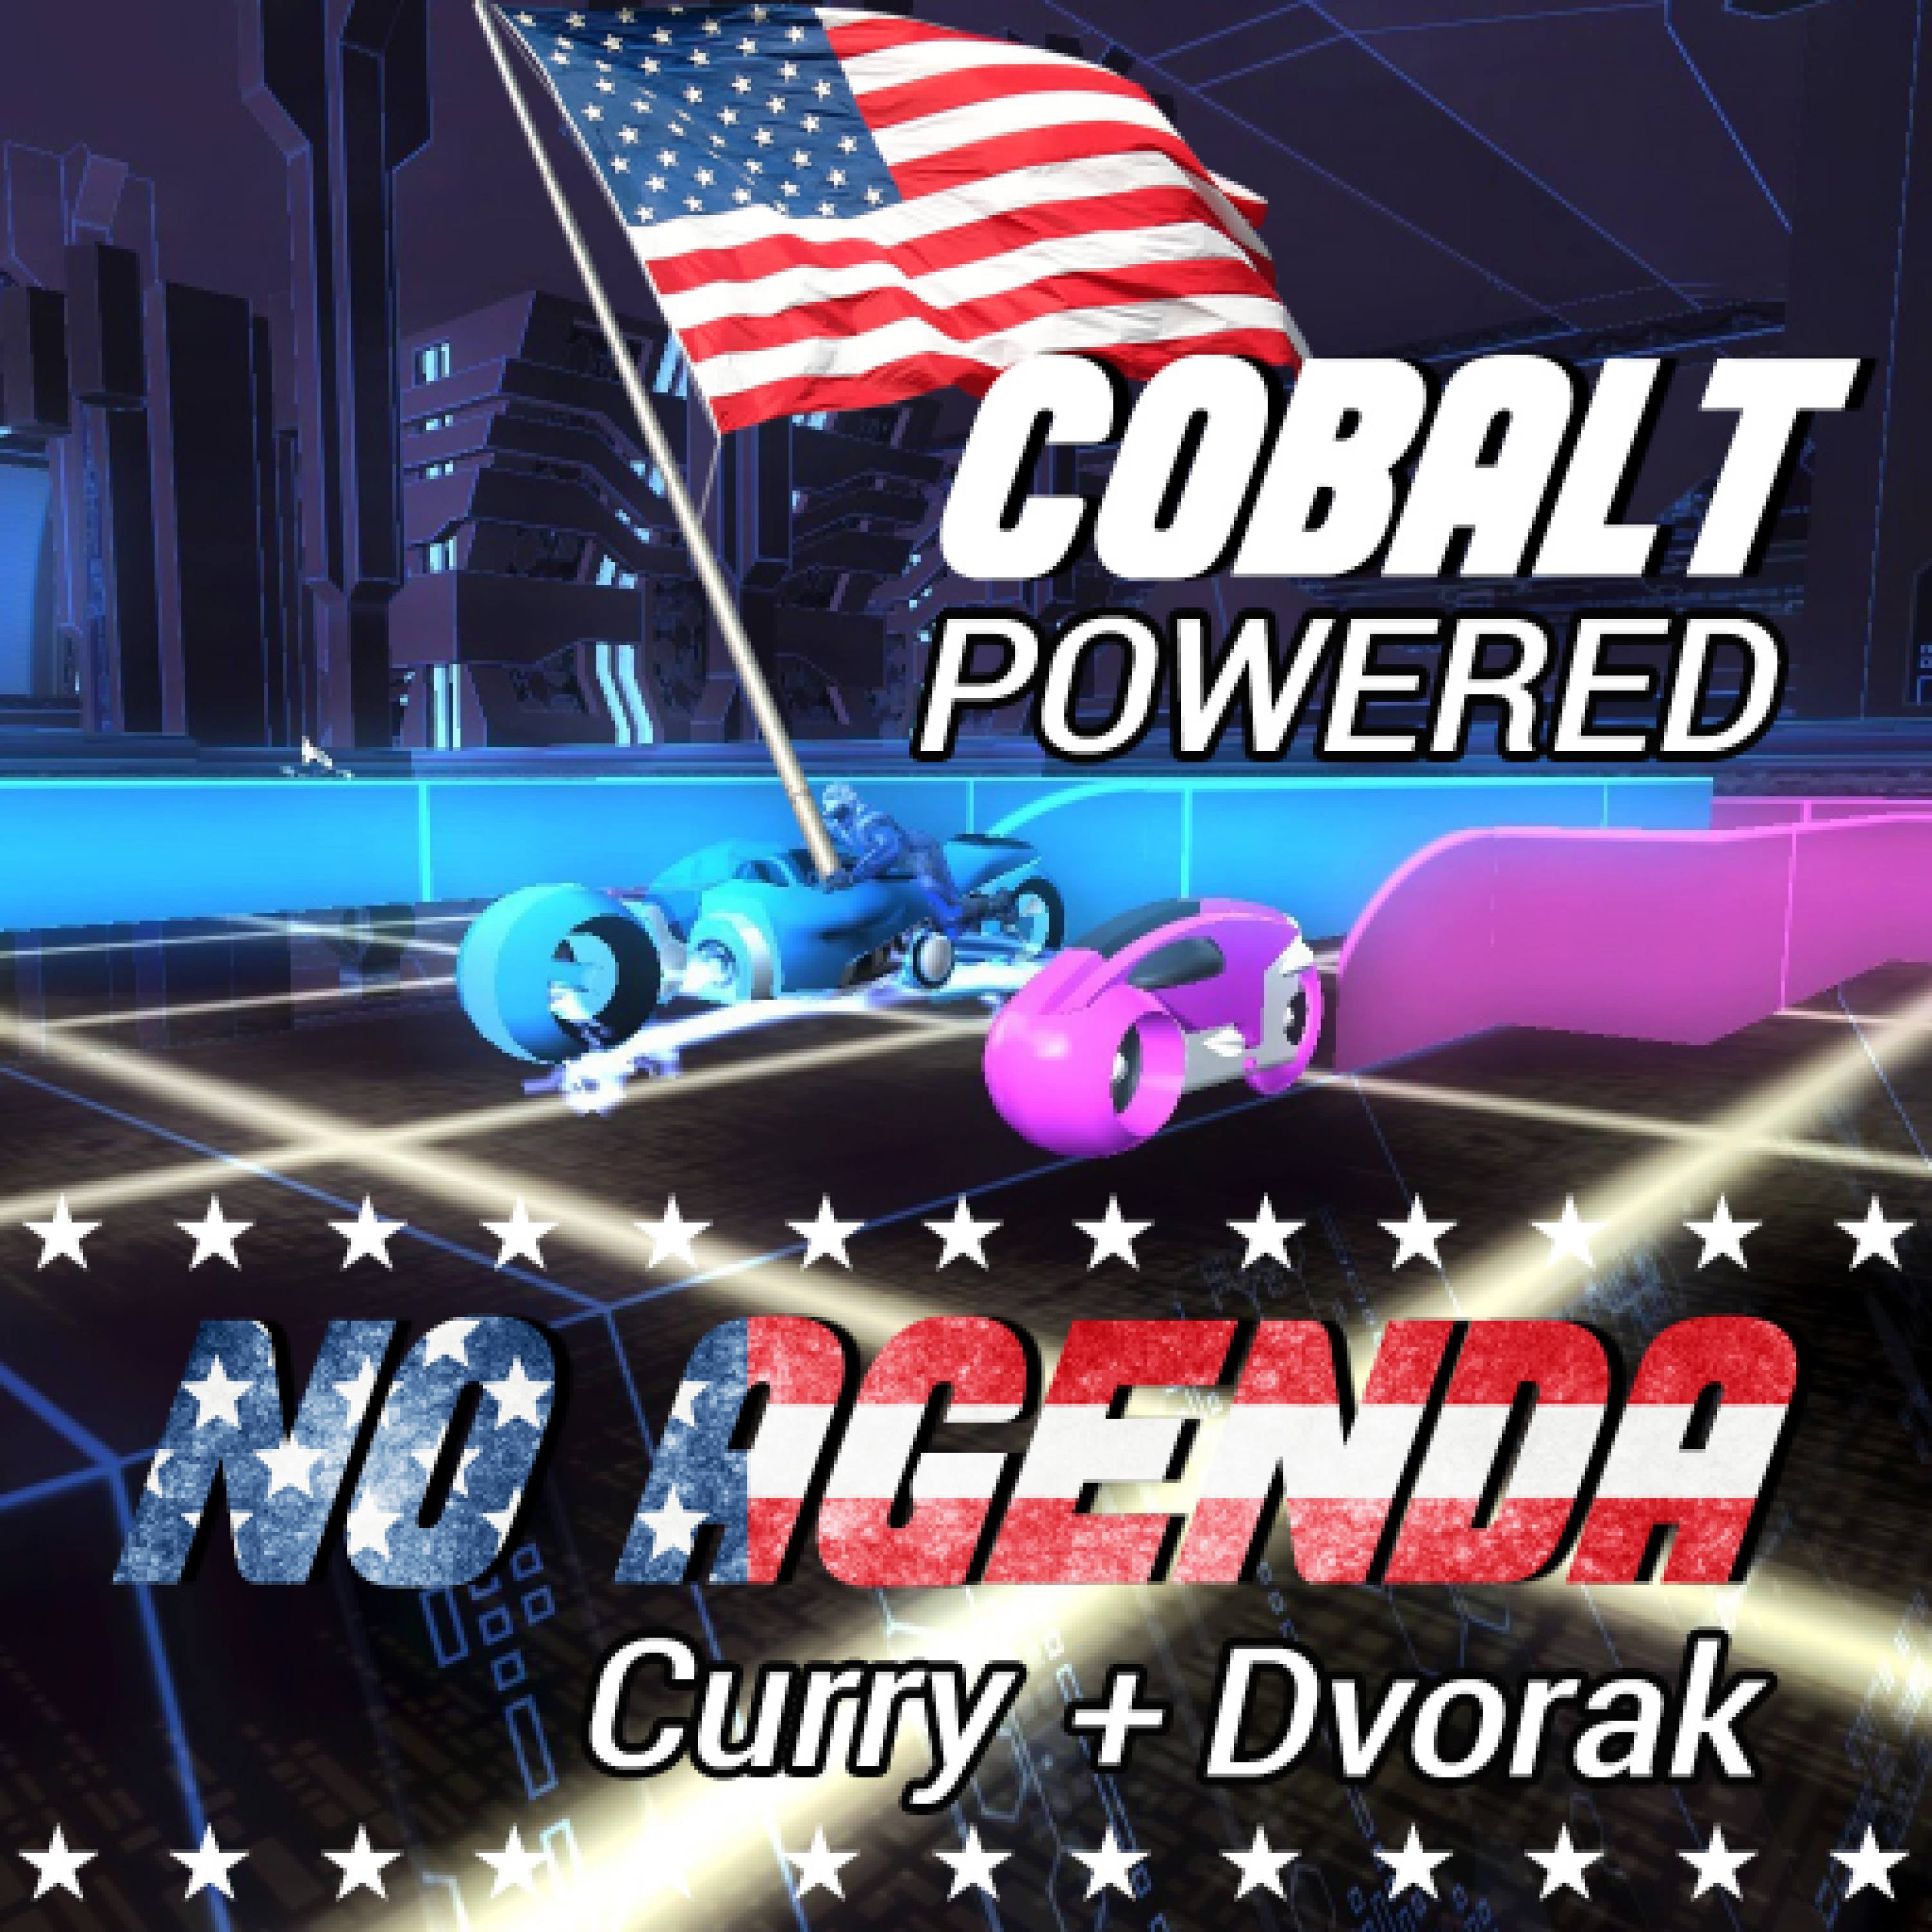 Colbalt Powered by nessworks for 